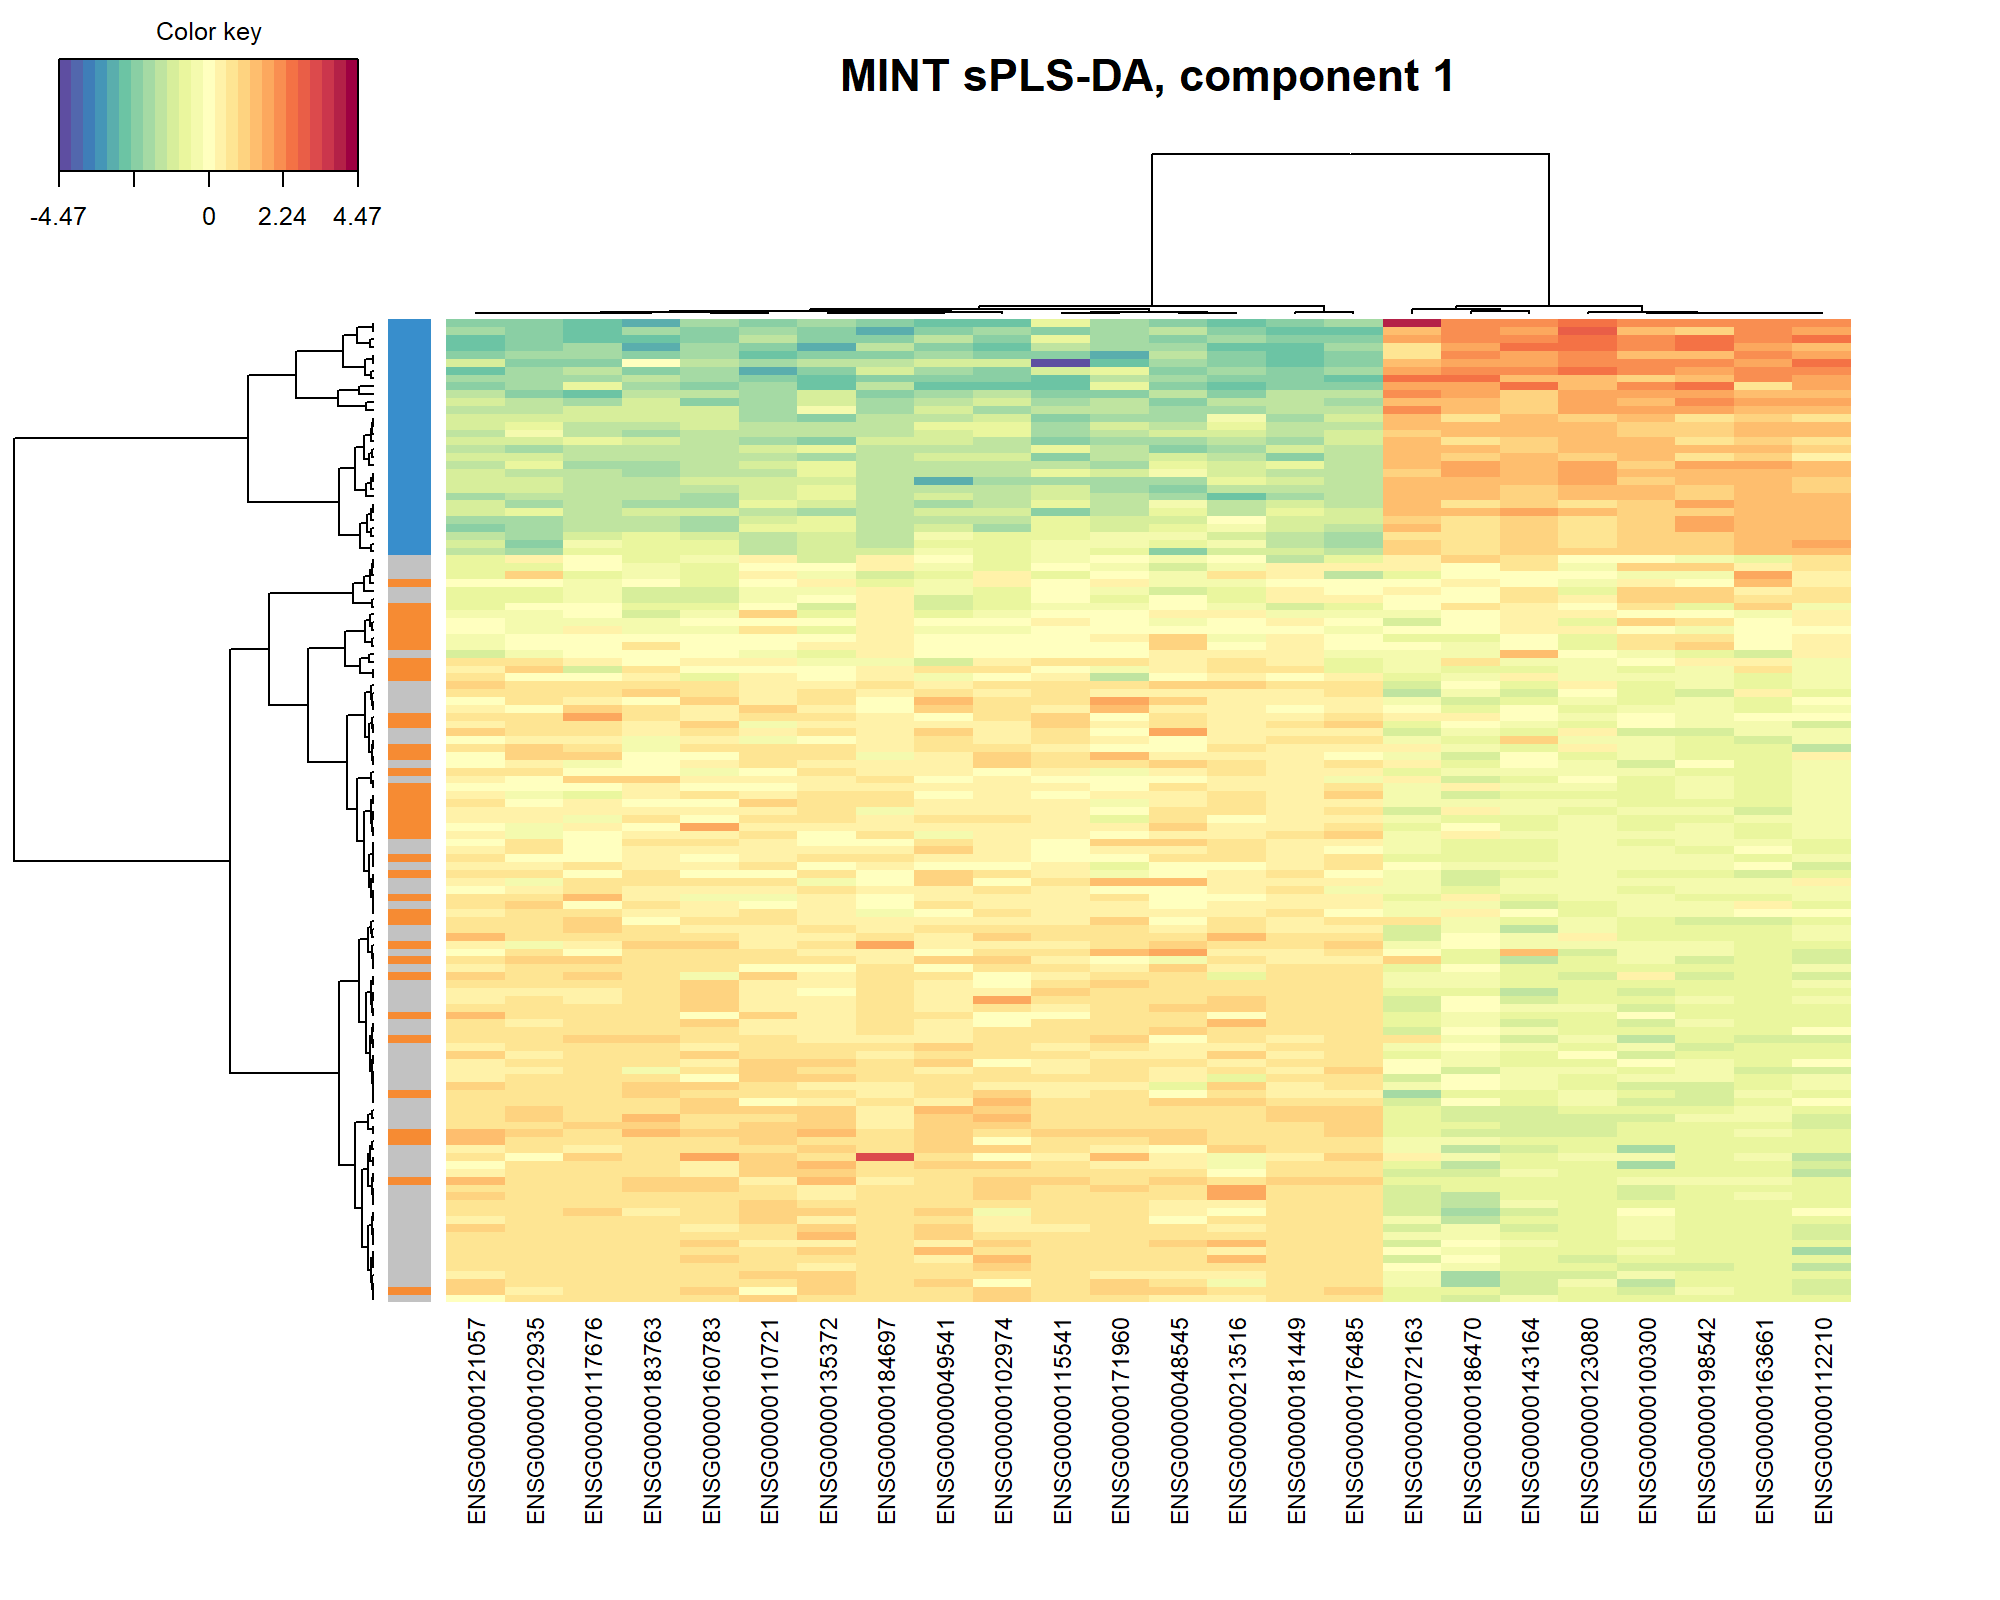 Clustered Image Map of the genes selected by MINT sPLS-DA on the stemcells gene expression data for component 1 only. A hierarchical clustering based on the gene expression levels of the selected genes on component 1, with samples in rows coloured according to cell type showing a separation of the fibroblast vs. the other cell types.